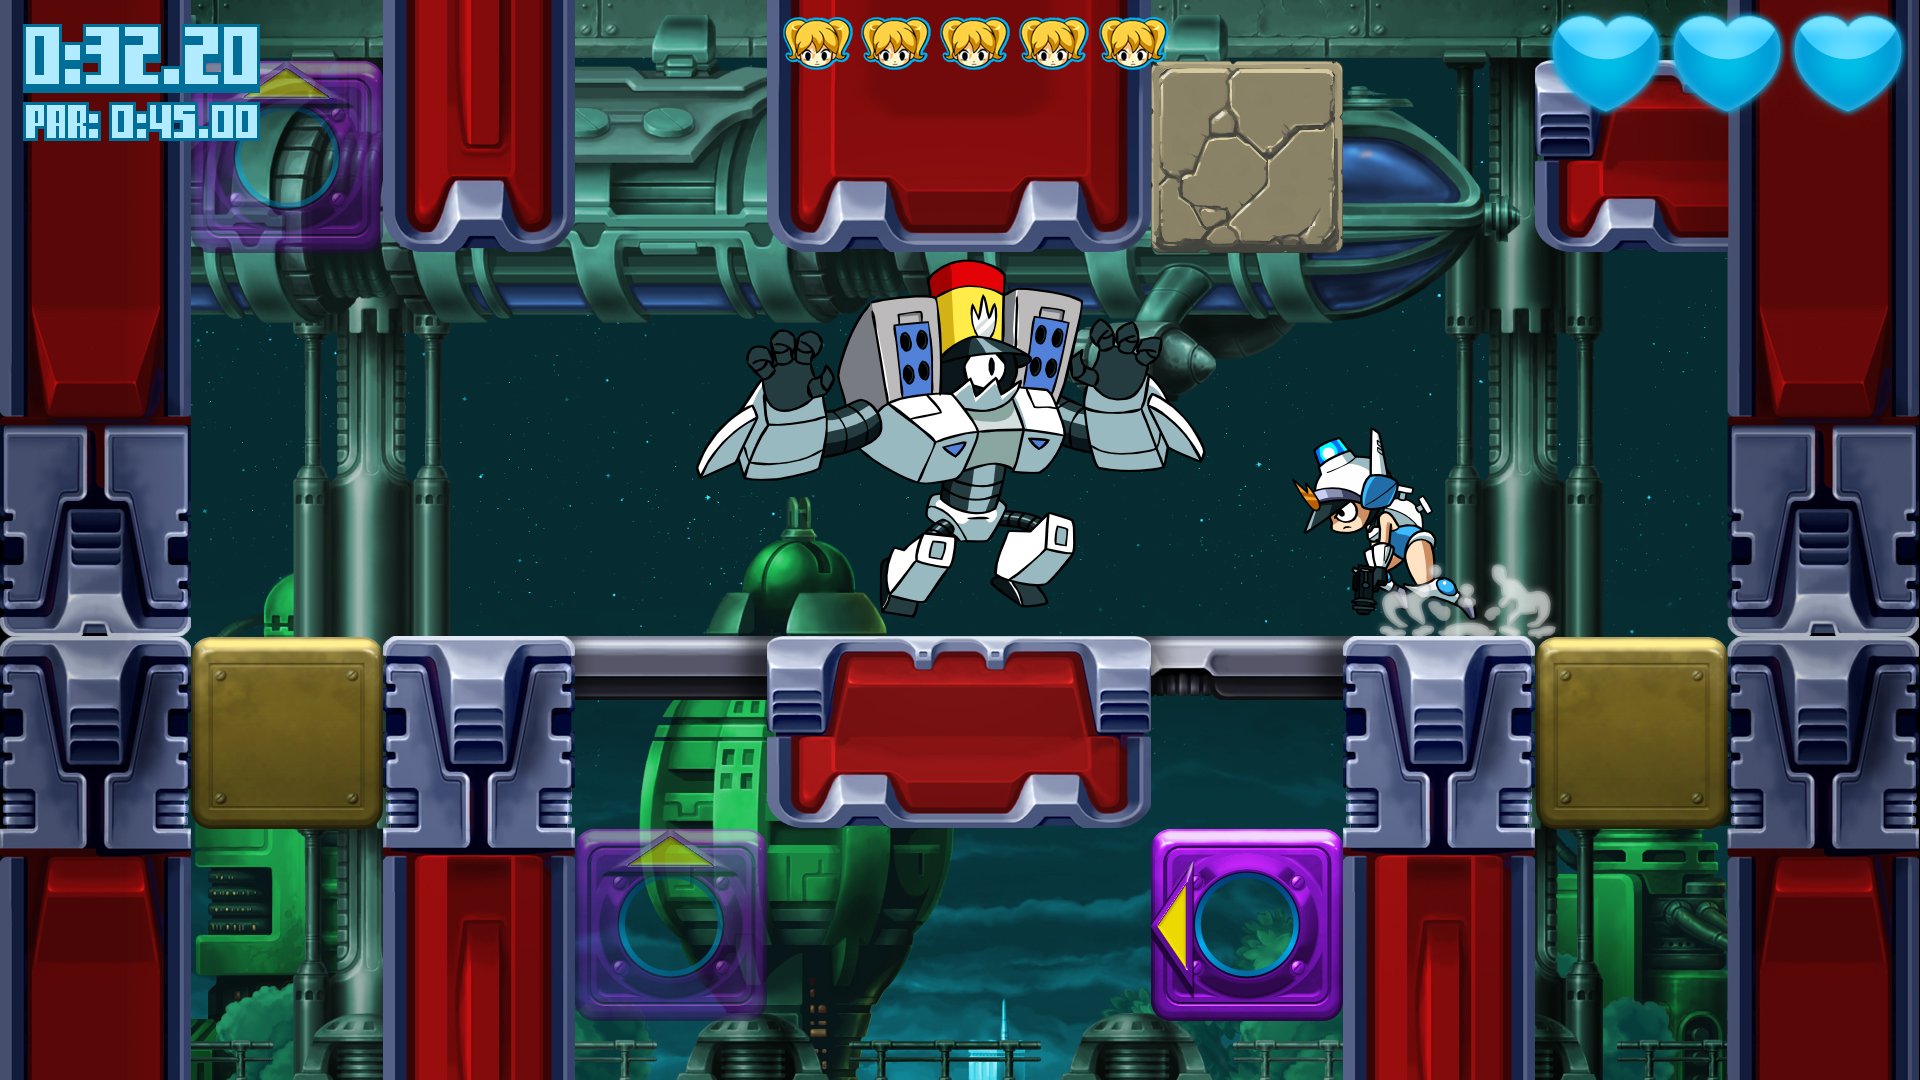 Mighty Switch Force! Hyper Drive Edition 4